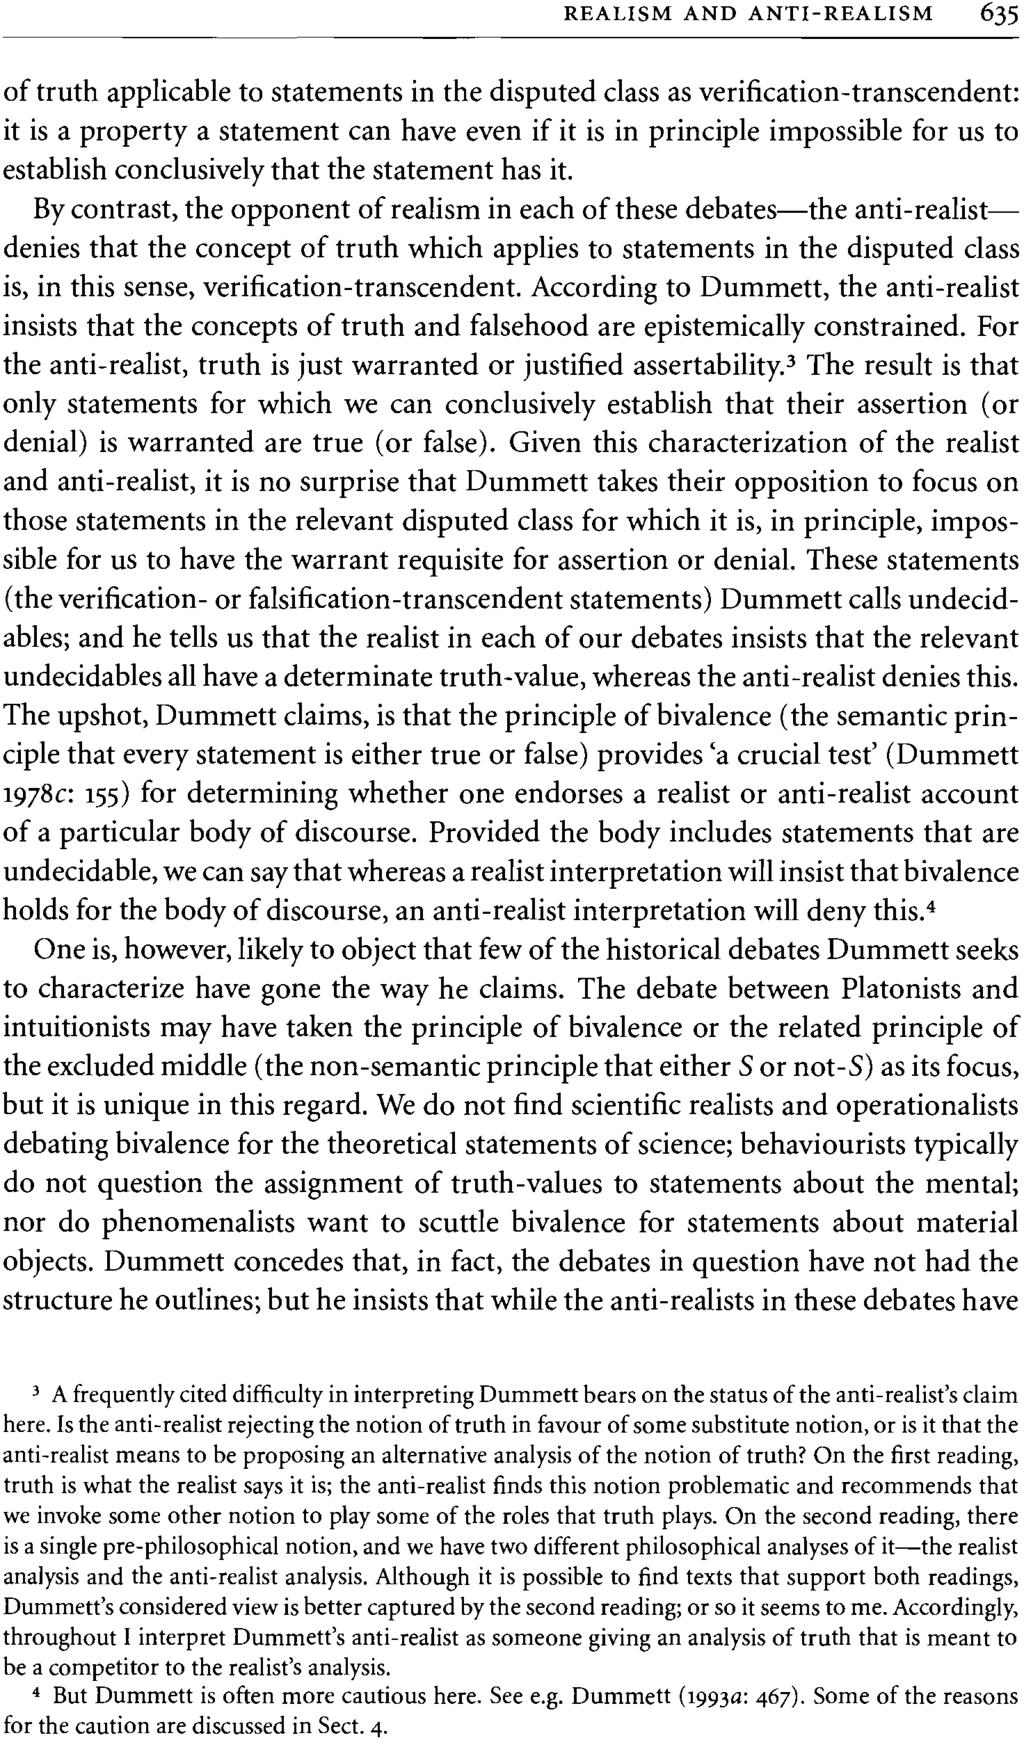 REALISM AND ANTI-REALISM 635 of truth applicable to statements in the disputed class as verification-transcendent: it is a property a statement can have even if it is in principle impossible for us